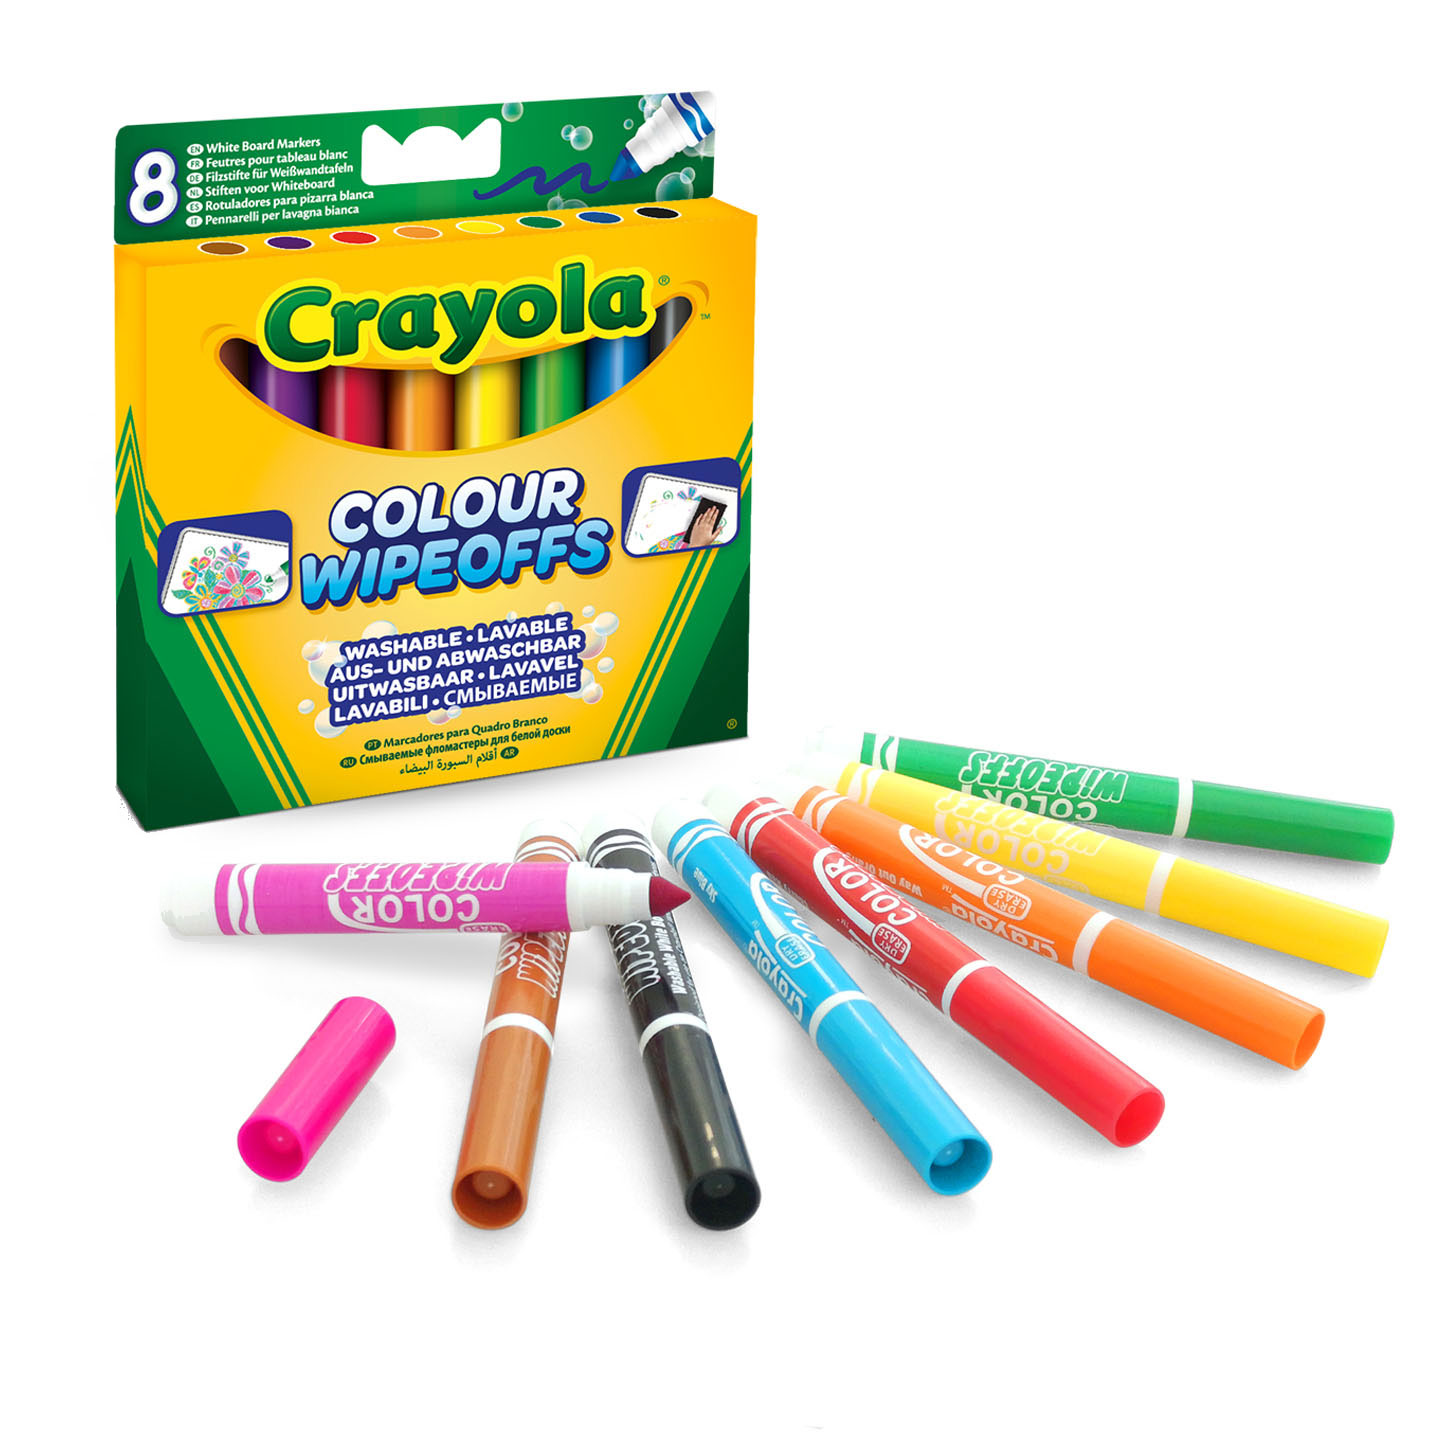 ROTULADORES BIC KIDS PACK 24